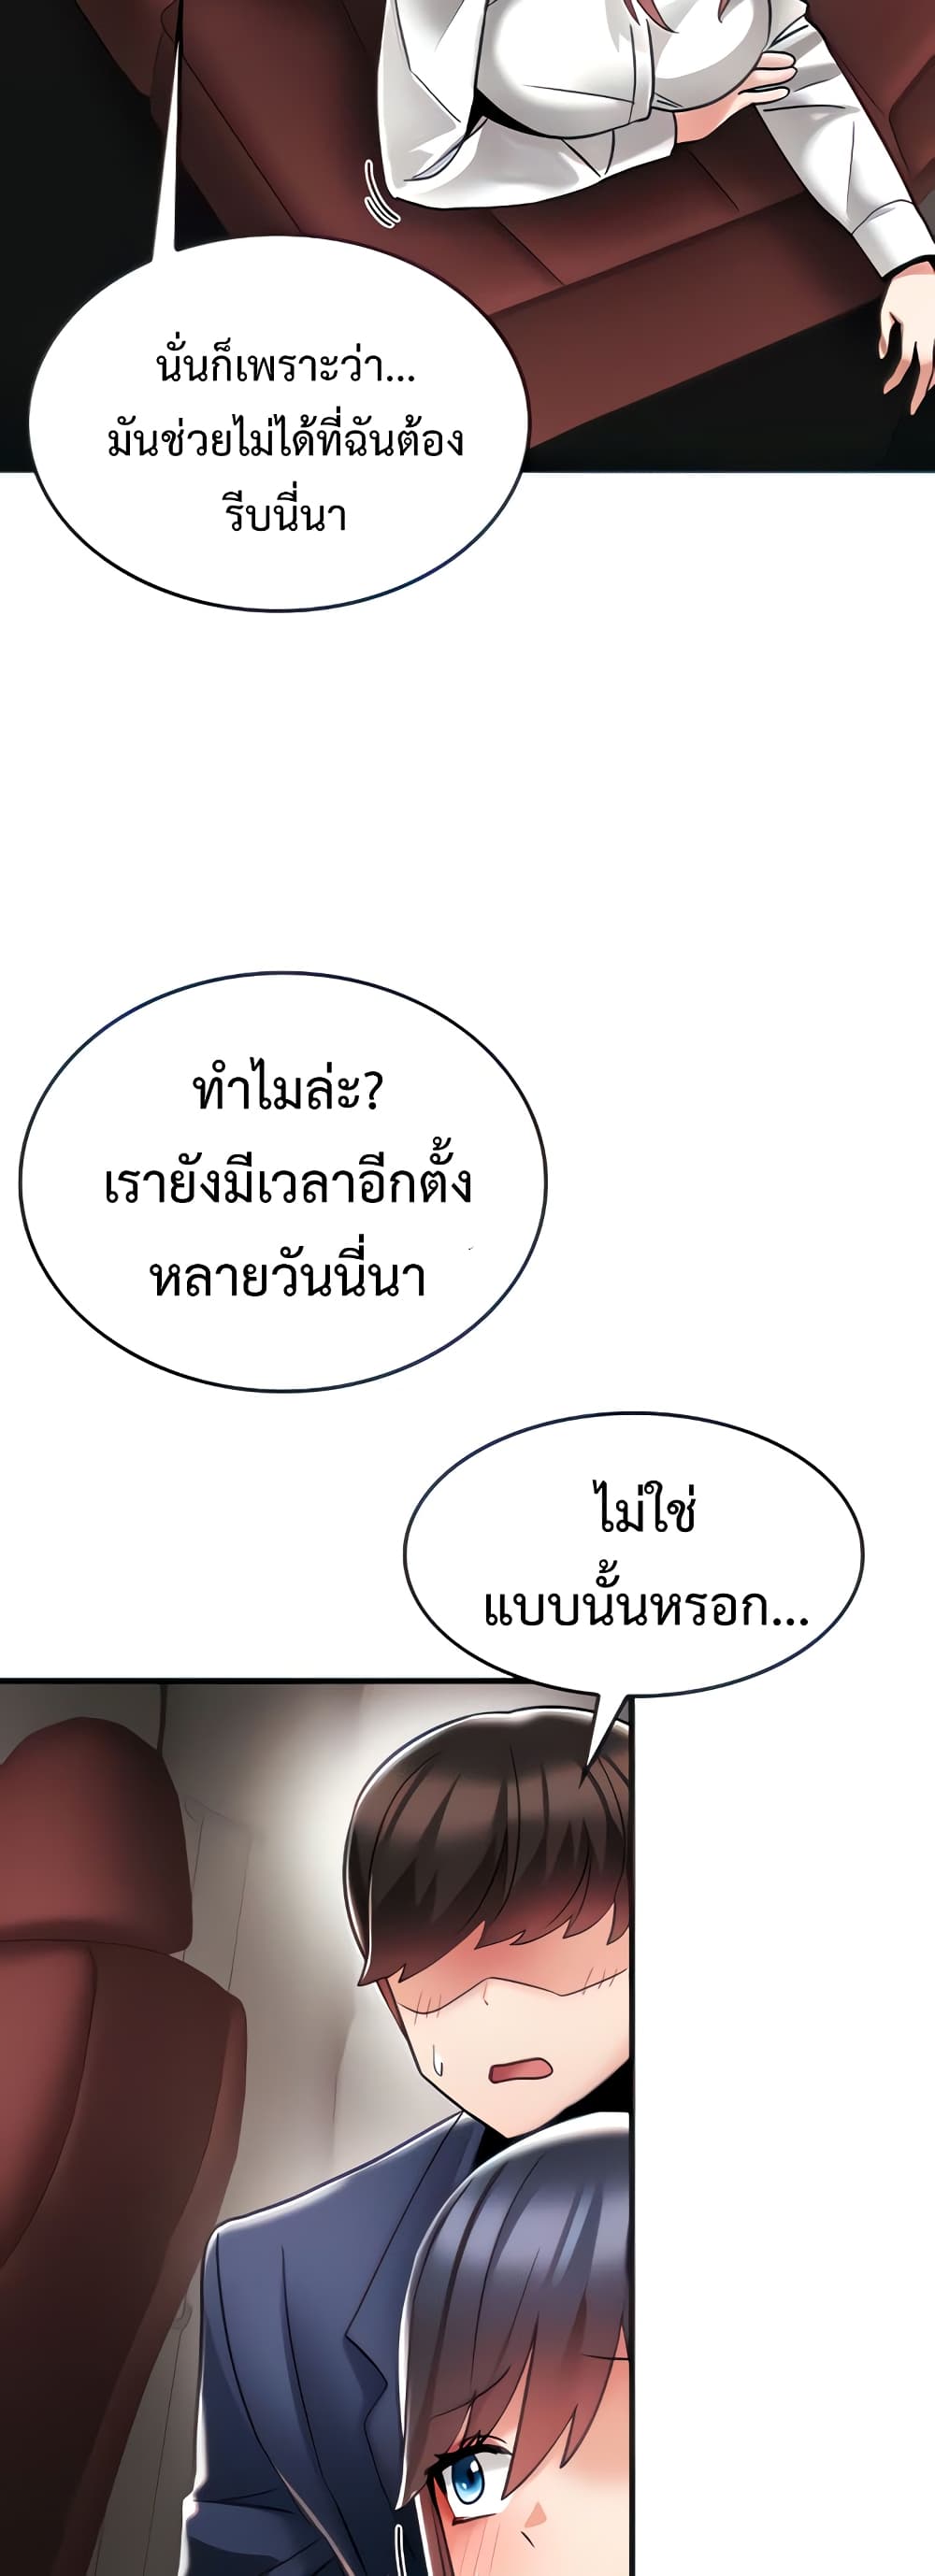 Relationship Reverse Button: Let’s Make Her Submissive 9 ภาพที่ 11